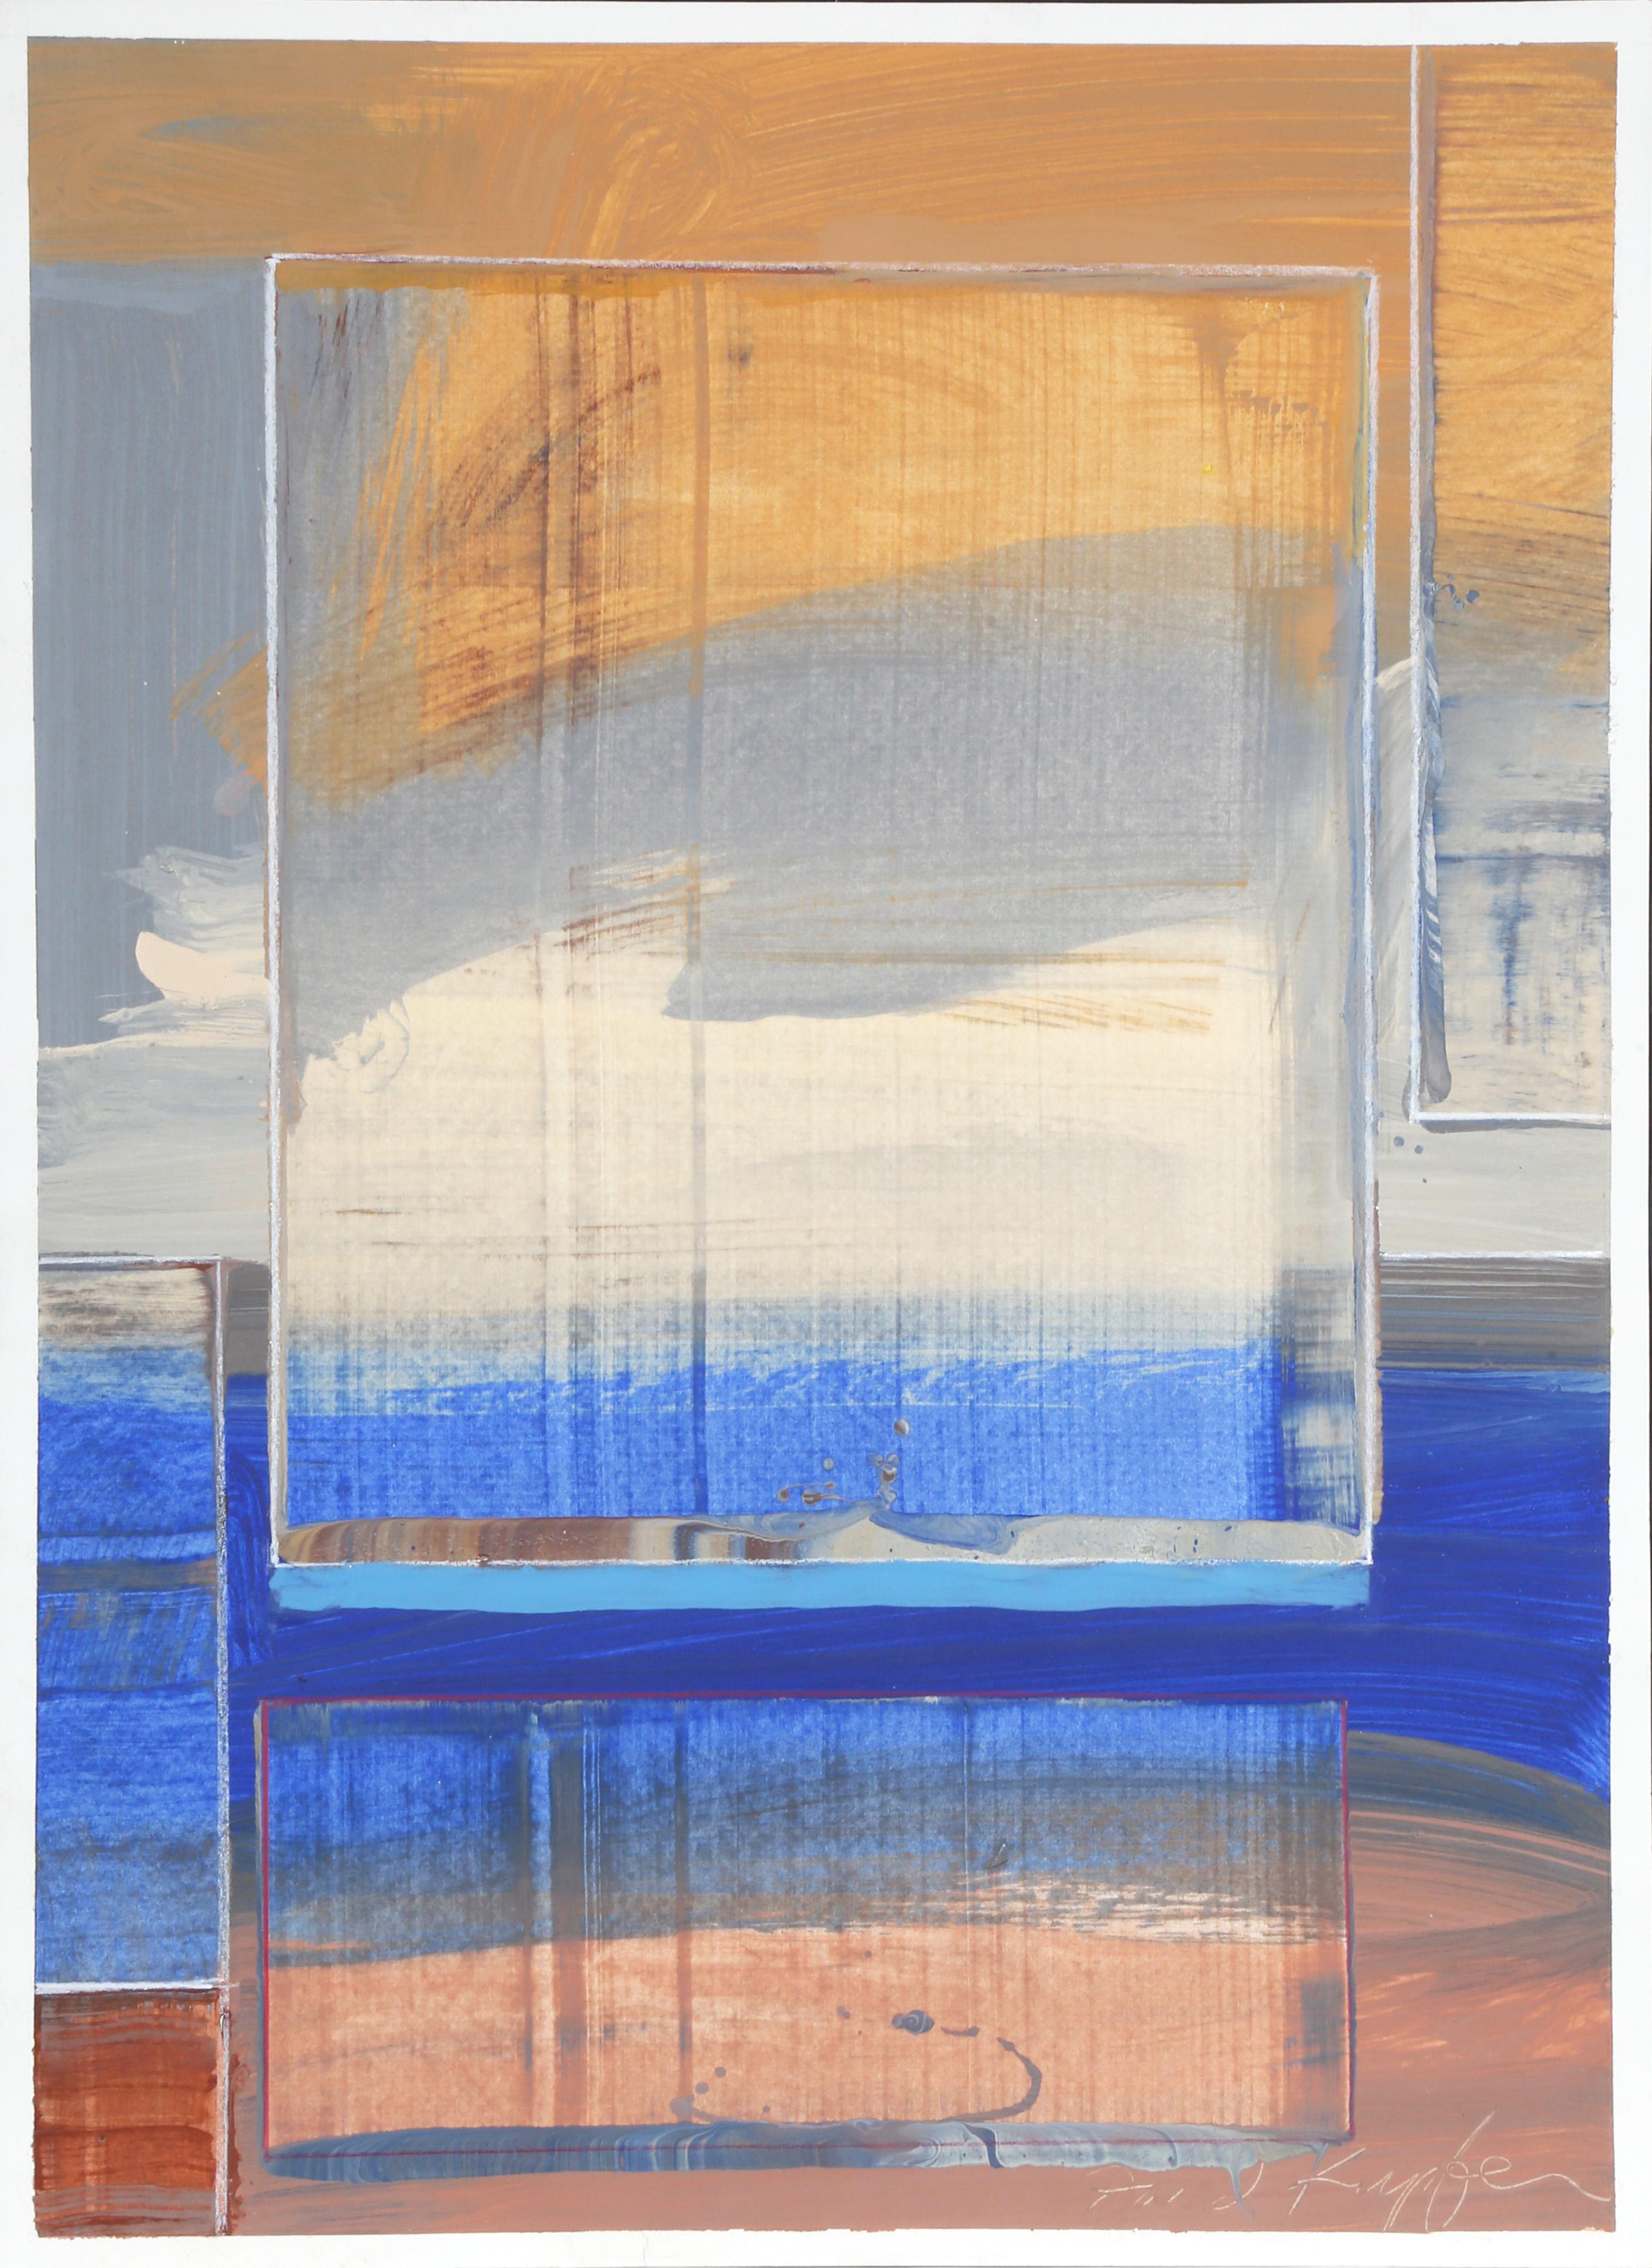 An abstract acrylic on paper painting that is reminiscent of an open window looking out onto a sunny ocean. Above, clouds lit white by the sun float by softly. This unique piece by David Kupferman is signed and titled on the verso in pencil.

Sea